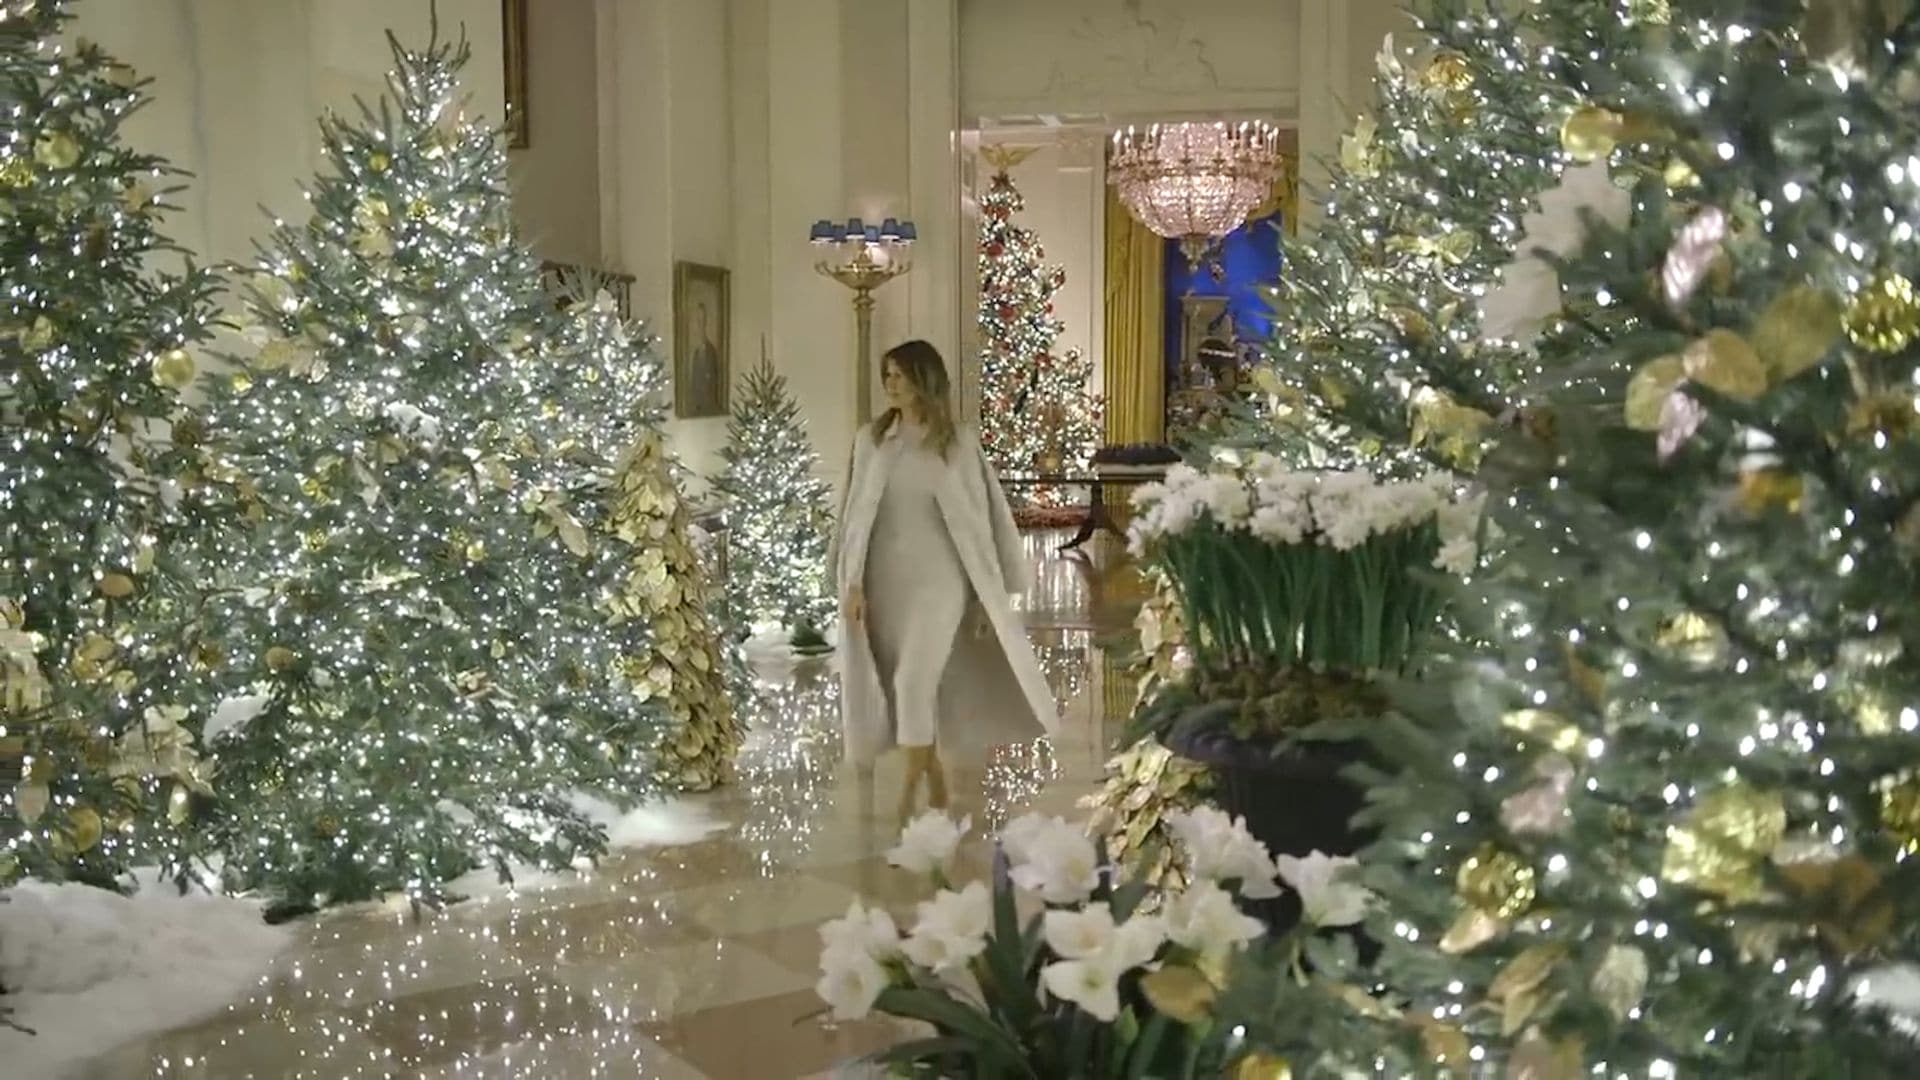 Melania Trump's Christmas decorations are lovely, but that coat looks ridiculous Washington Post